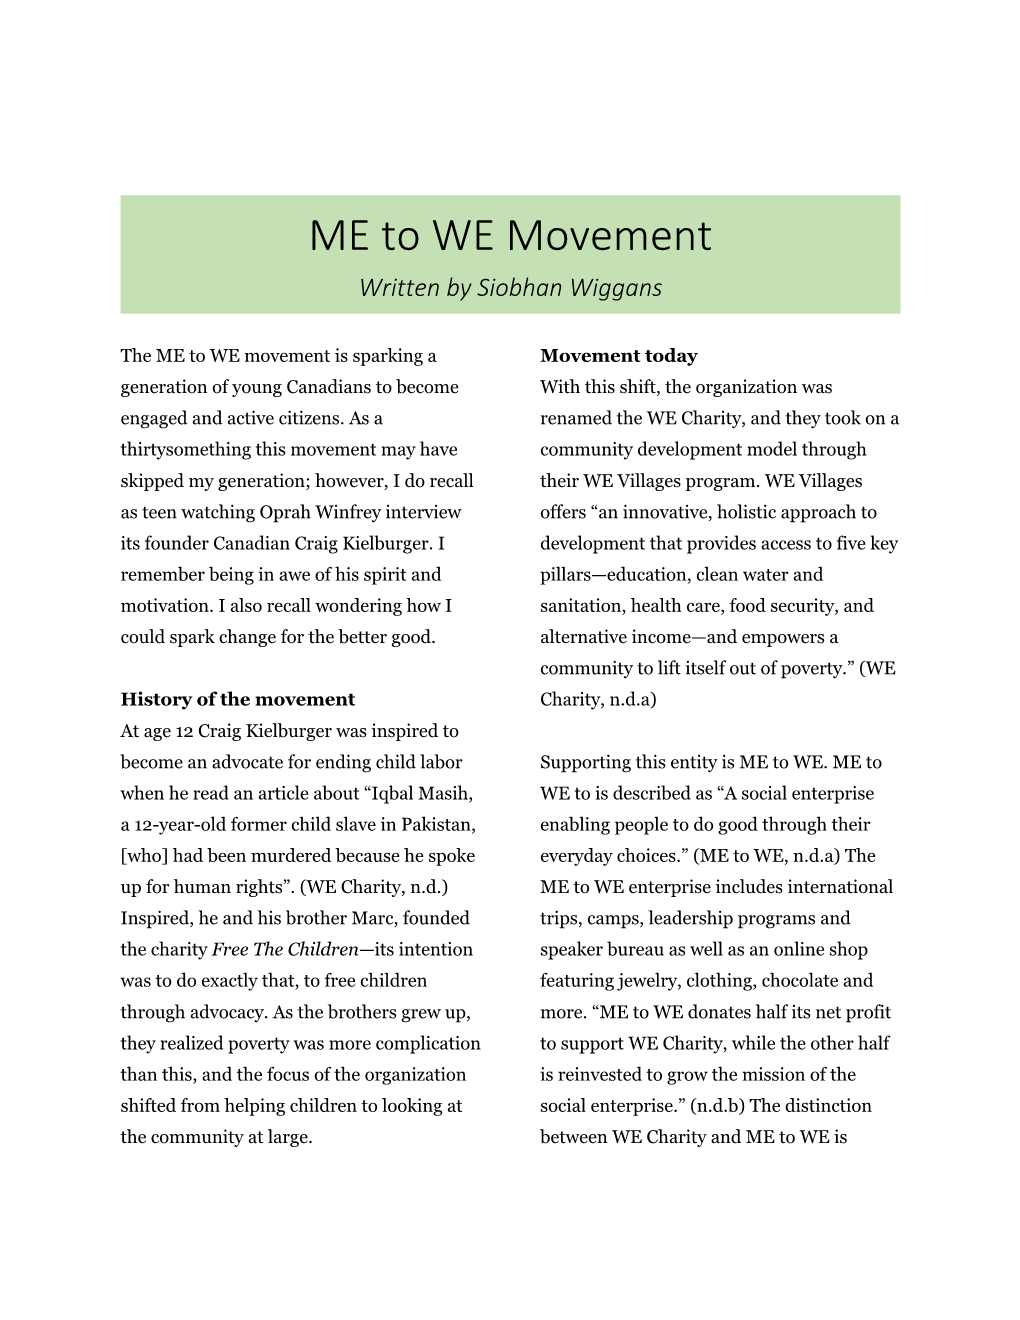 ME to WE Movement Written by Siobhan Wiggans